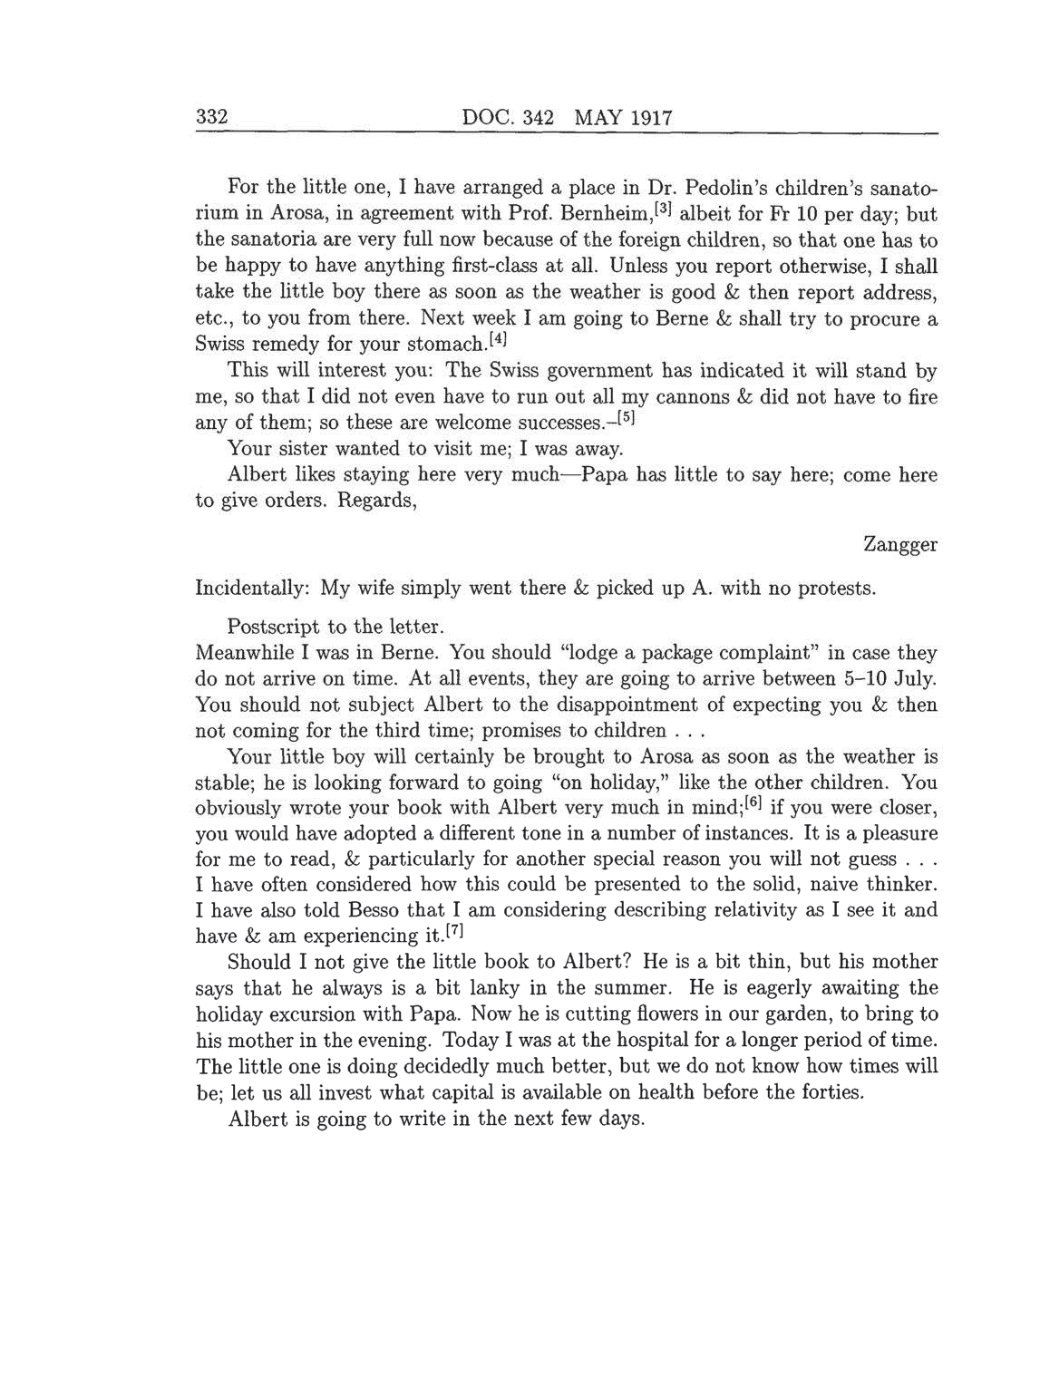 Volume 8: The Berlin Years: Correspondence, 1914-1918 (English translation supplement) page 332